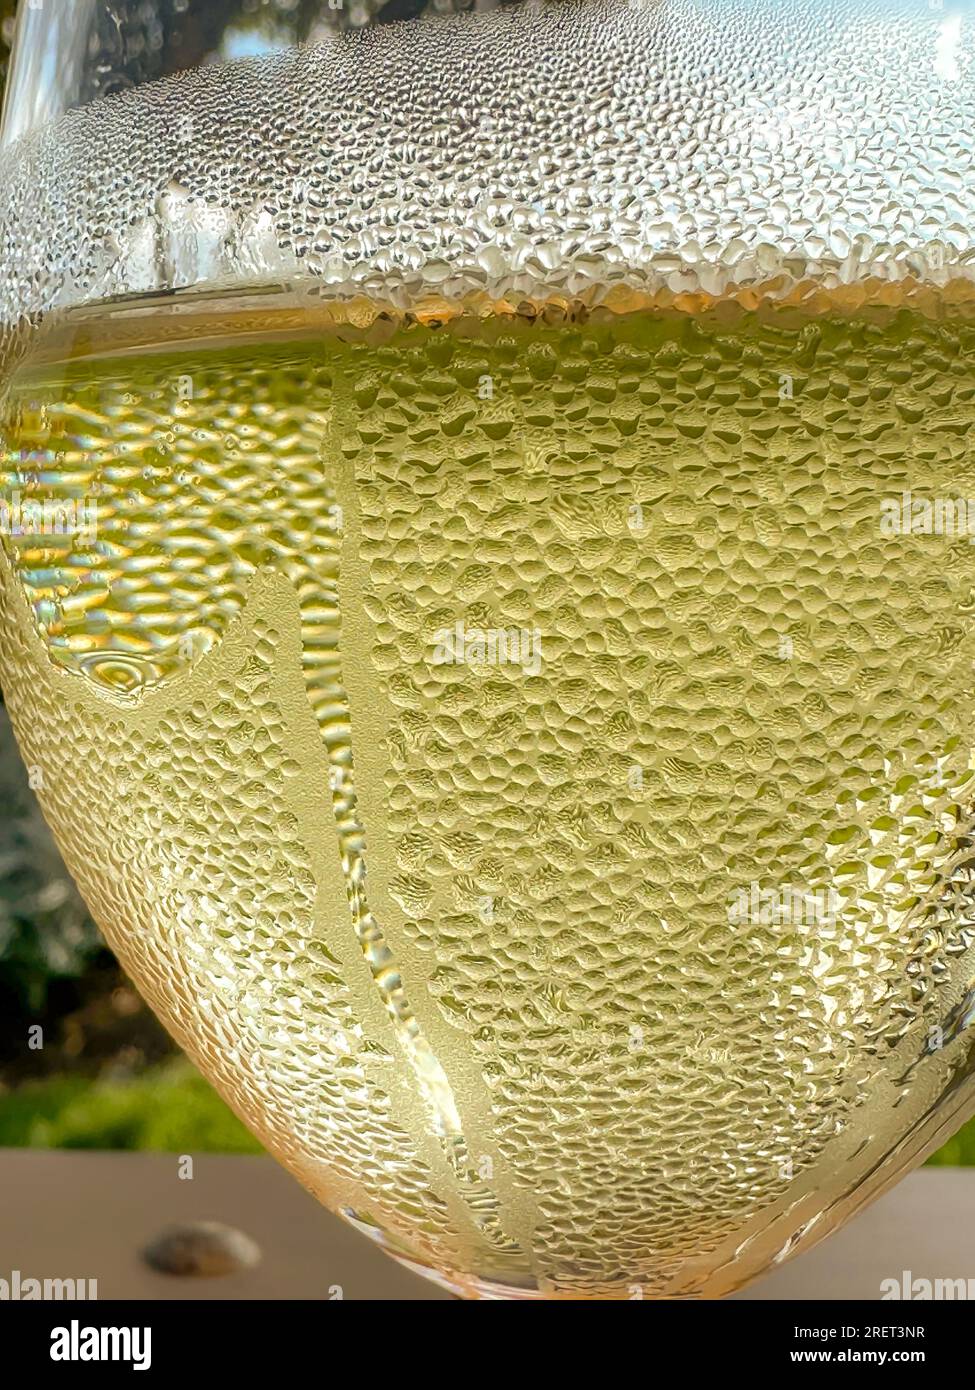 Close up of a wine glass with condensation on it in an outdoor setting. Stock Photo